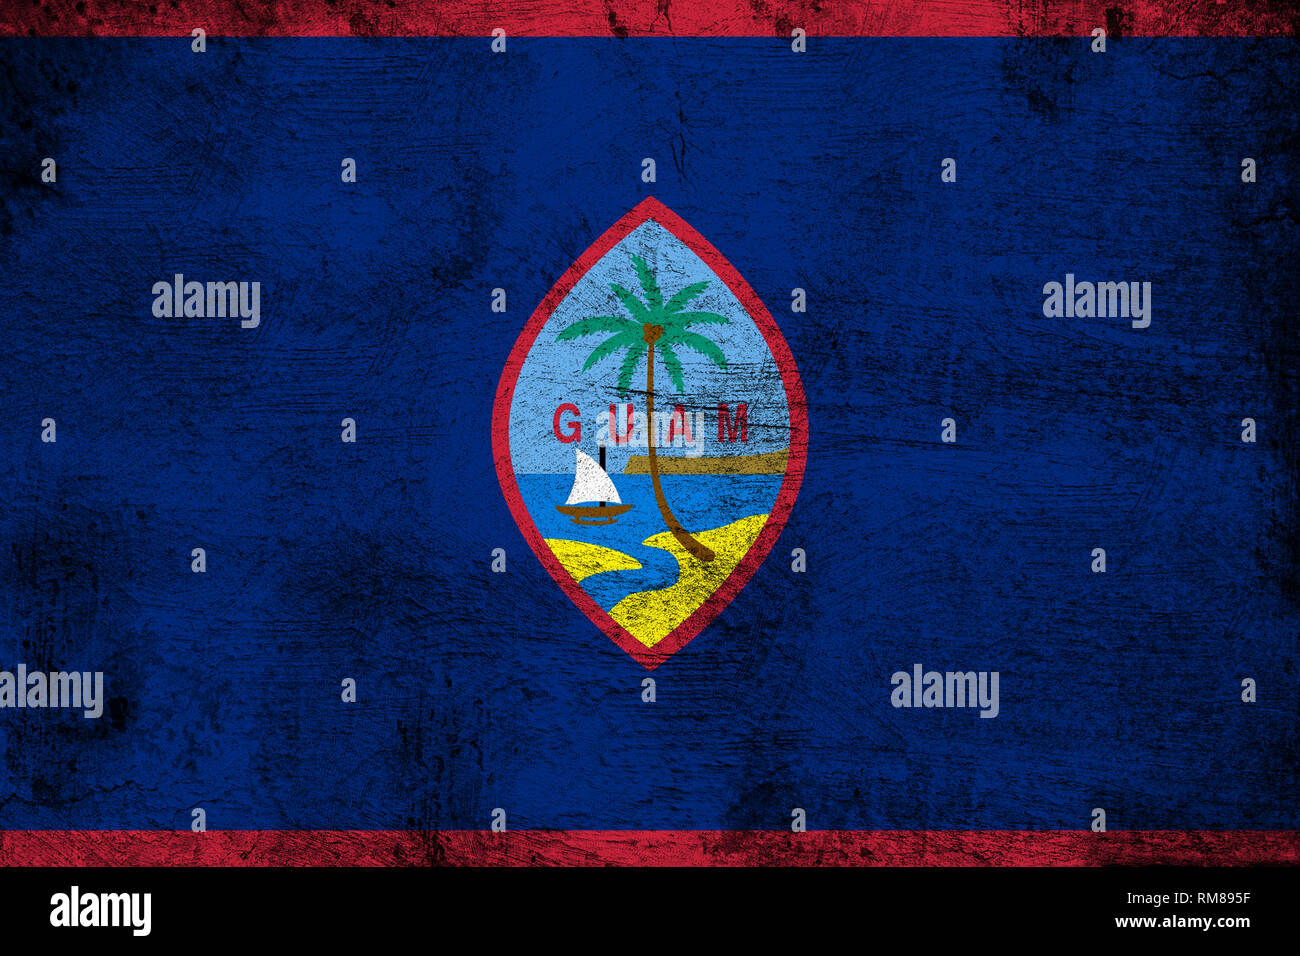 Guam grunge and dirty flag illustration. Perfect for background or texture purposes. Stock Photo